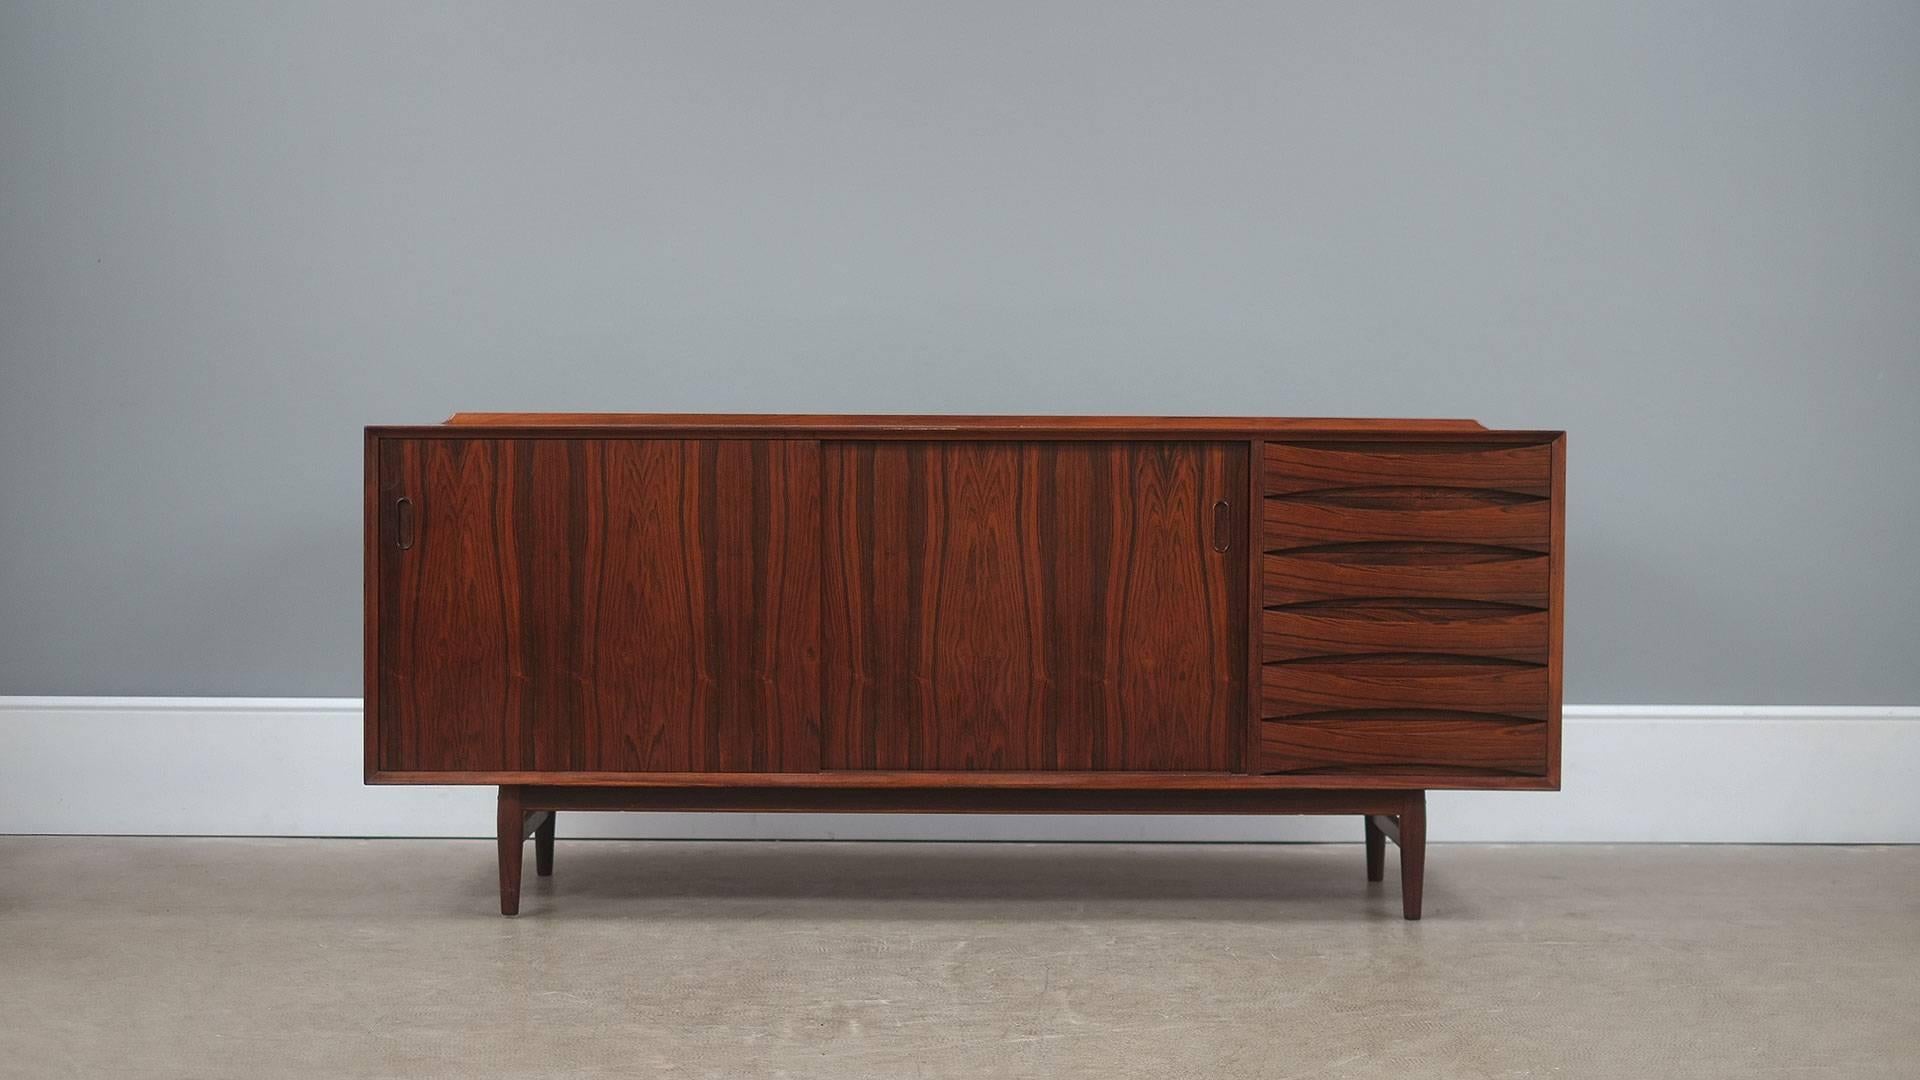 Beautiful low sideboard in rosewood with highly figured grain designed by Arne Vodder for Sibast, Denmark. Classic and sought after piece.